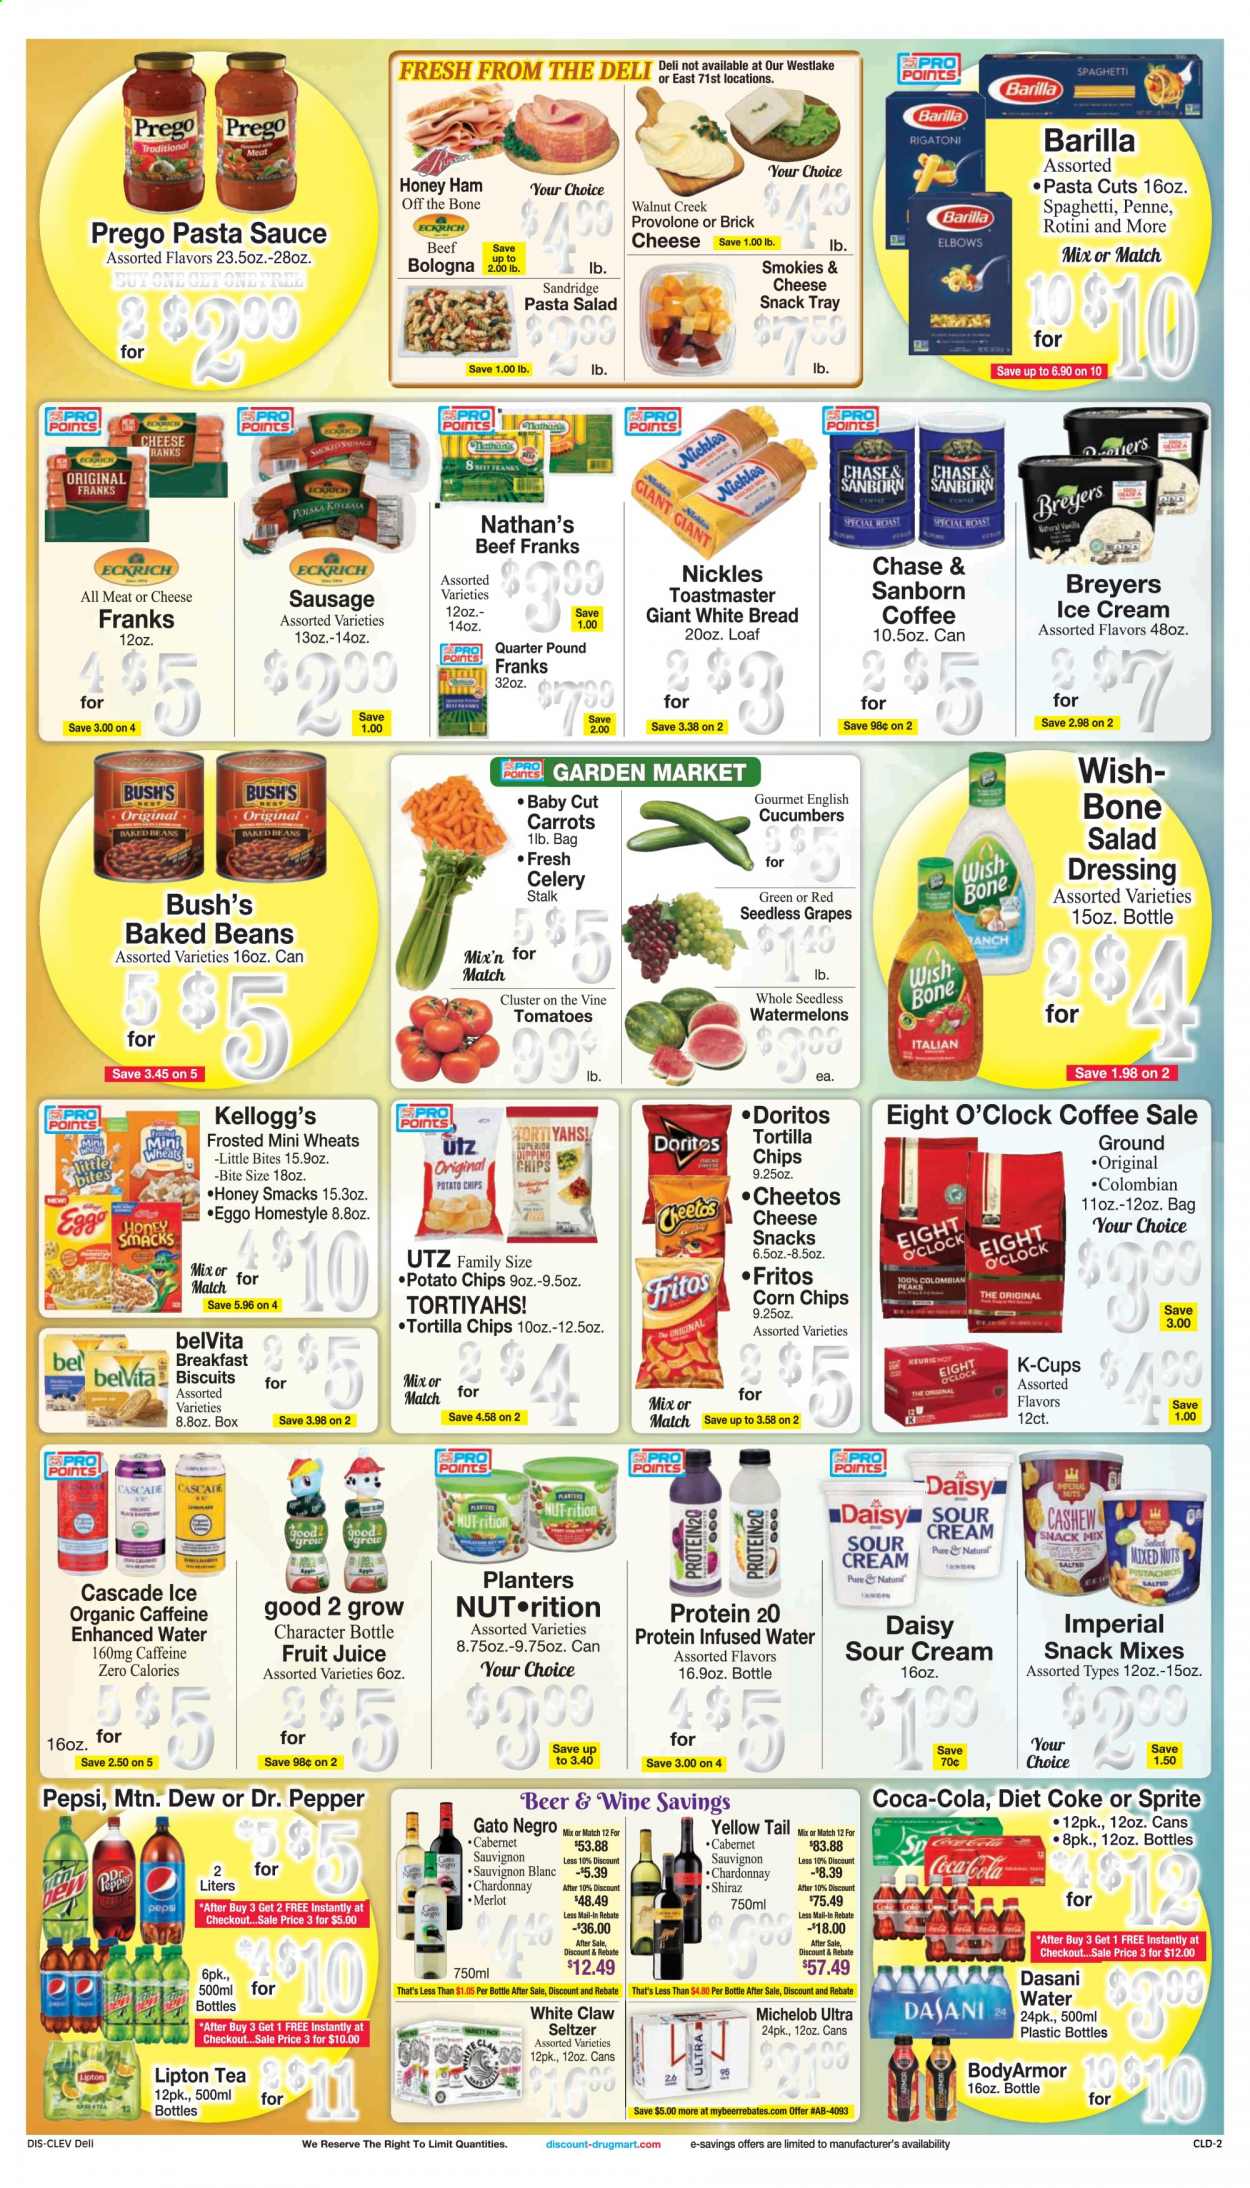 thumbnail - Discount Drug Mart Flyer - 06/23/2021 - 06/29/2021 - Sales products - seedless grapes, bread, white bread, carrots, celery, cucumber, tomatoes, grapes, spaghetti, pasta sauce, sauce, Barilla, ham, bologna sausage, sausage, pasta salad, Provolone, sour cream, ice cream, snack, Kellogg's, biscuit, Little Bites, Doritos, Fritos, tortilla chips, potato chips, Cheetos, chips, corn chips, baked beans, belVita, penne, salad dressing, dressing, pistachios, mixed nuts, Planters, Coca-Cola, Mountain Dew, Sprite, Pepsi, juice, fruit juice, Lipton, Dr. Pepper, Diet Coke, seltzer water, tea, coffee, coffee capsules, K-Cups, Eight O'Clock, Cabernet Sauvignon, white wine, Chardonnay, Merlot, Shiraz, Sauvignon Blanc, White Claw, beer, Michelob, Cascade, tray. Page 2.